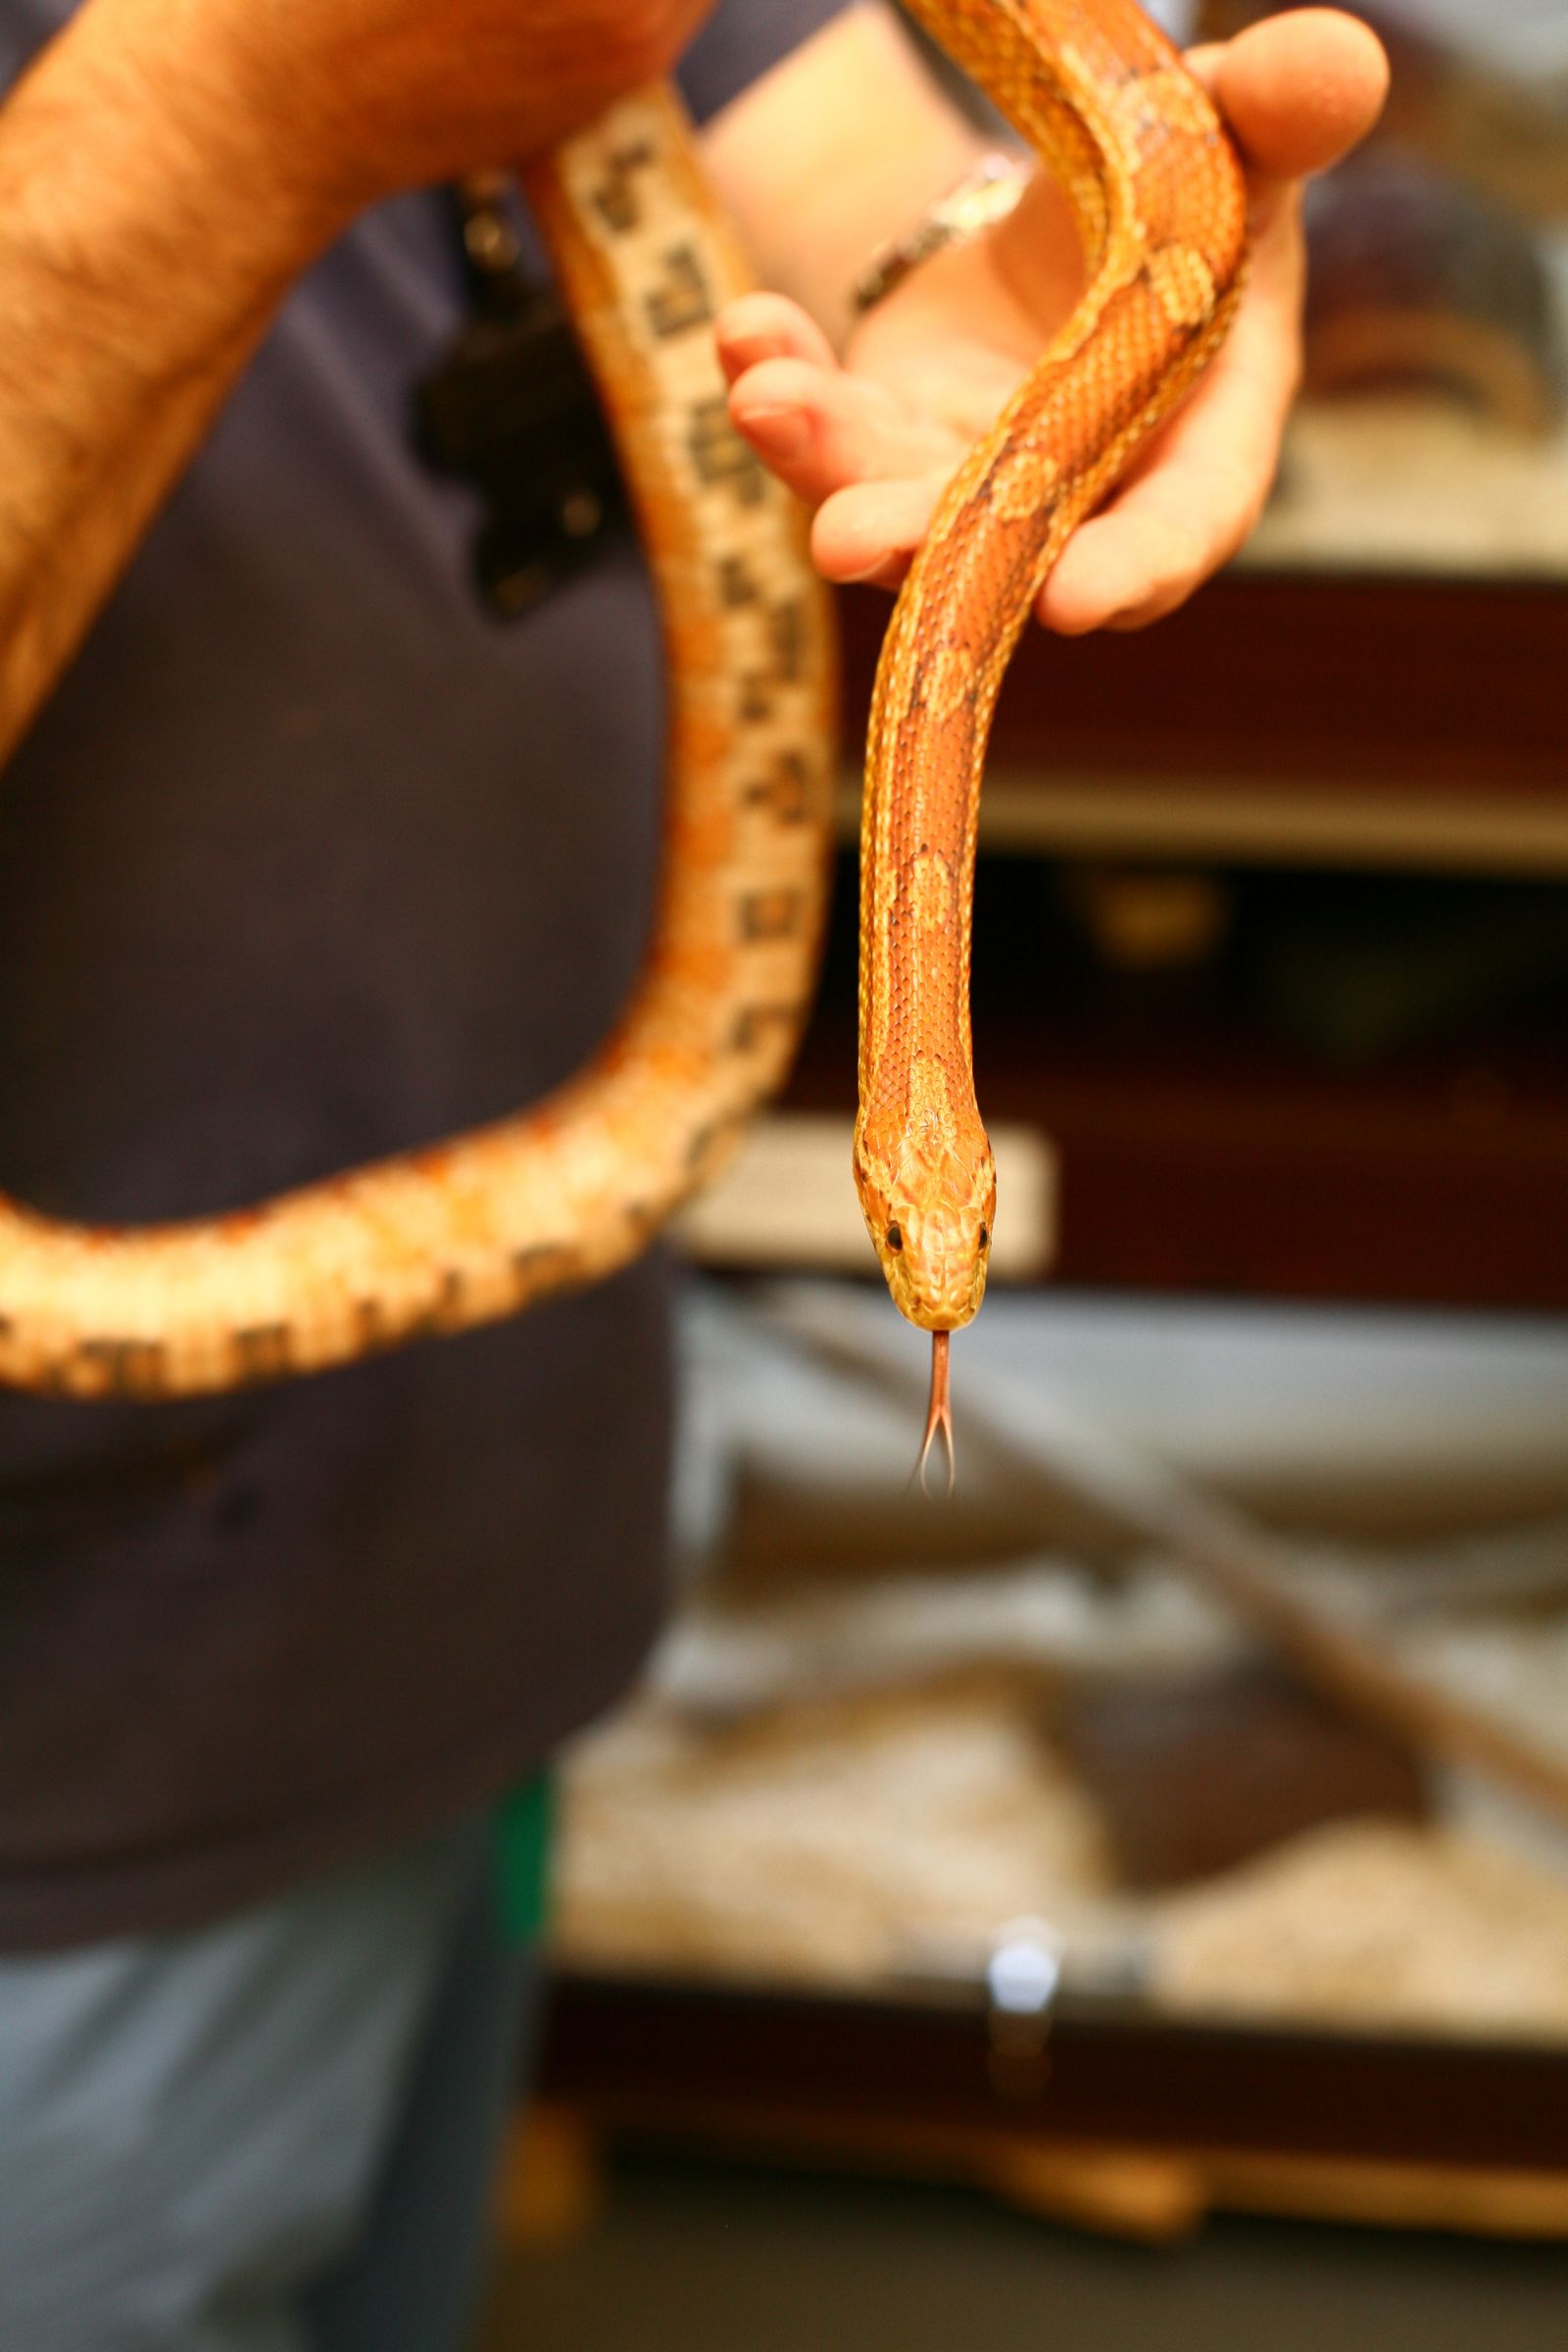 Brown snake in hand